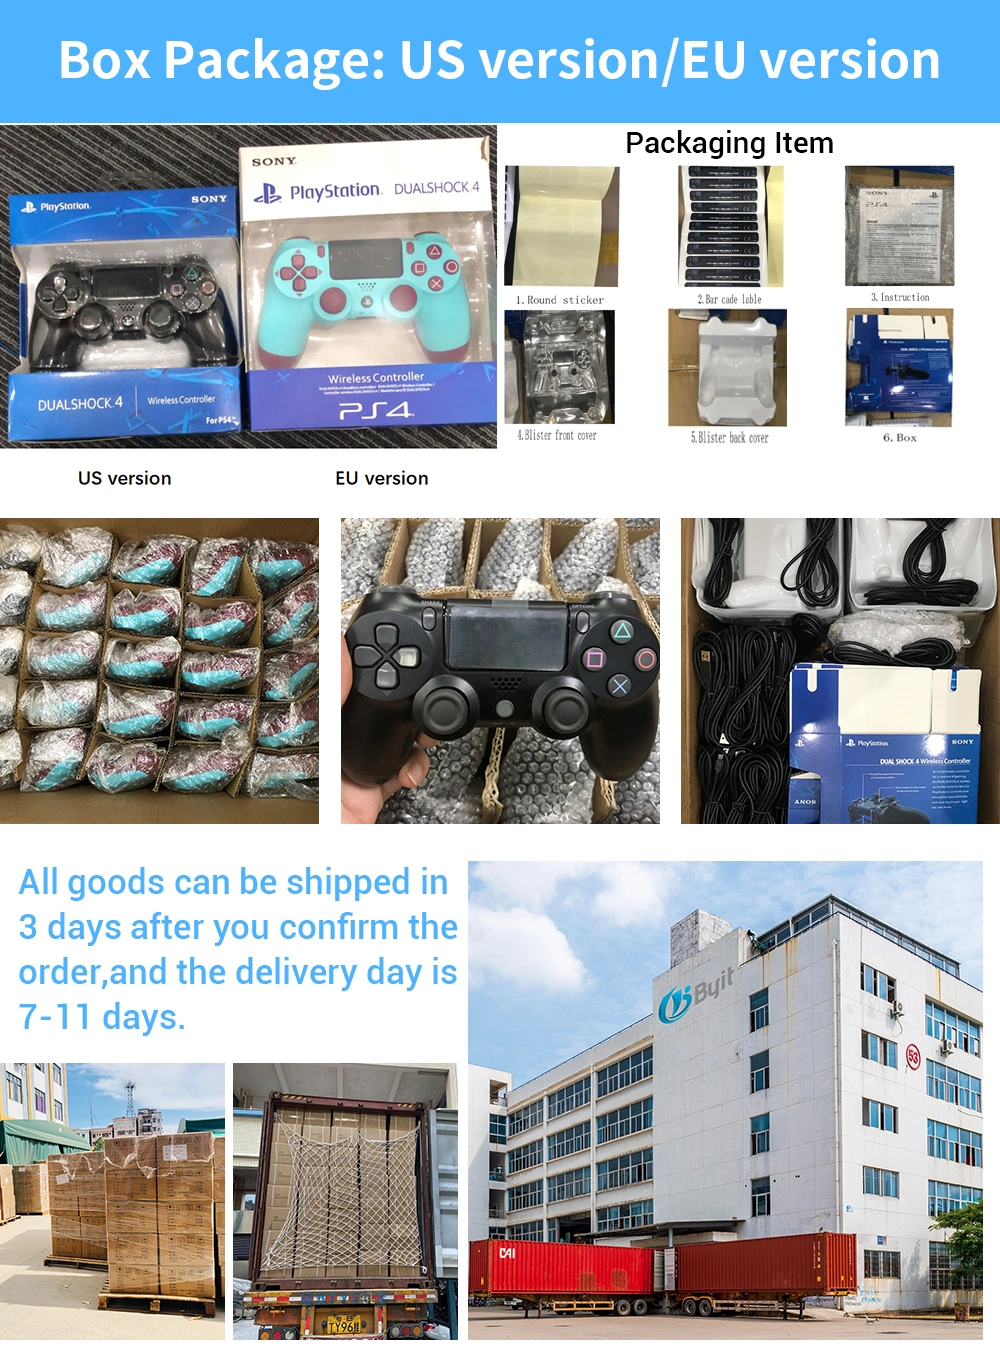 Byit Best Quality Version 4 Wireless Video Modded PS4 Controller for Soni Playstation 4 Dualshock4 PS4 Joystick